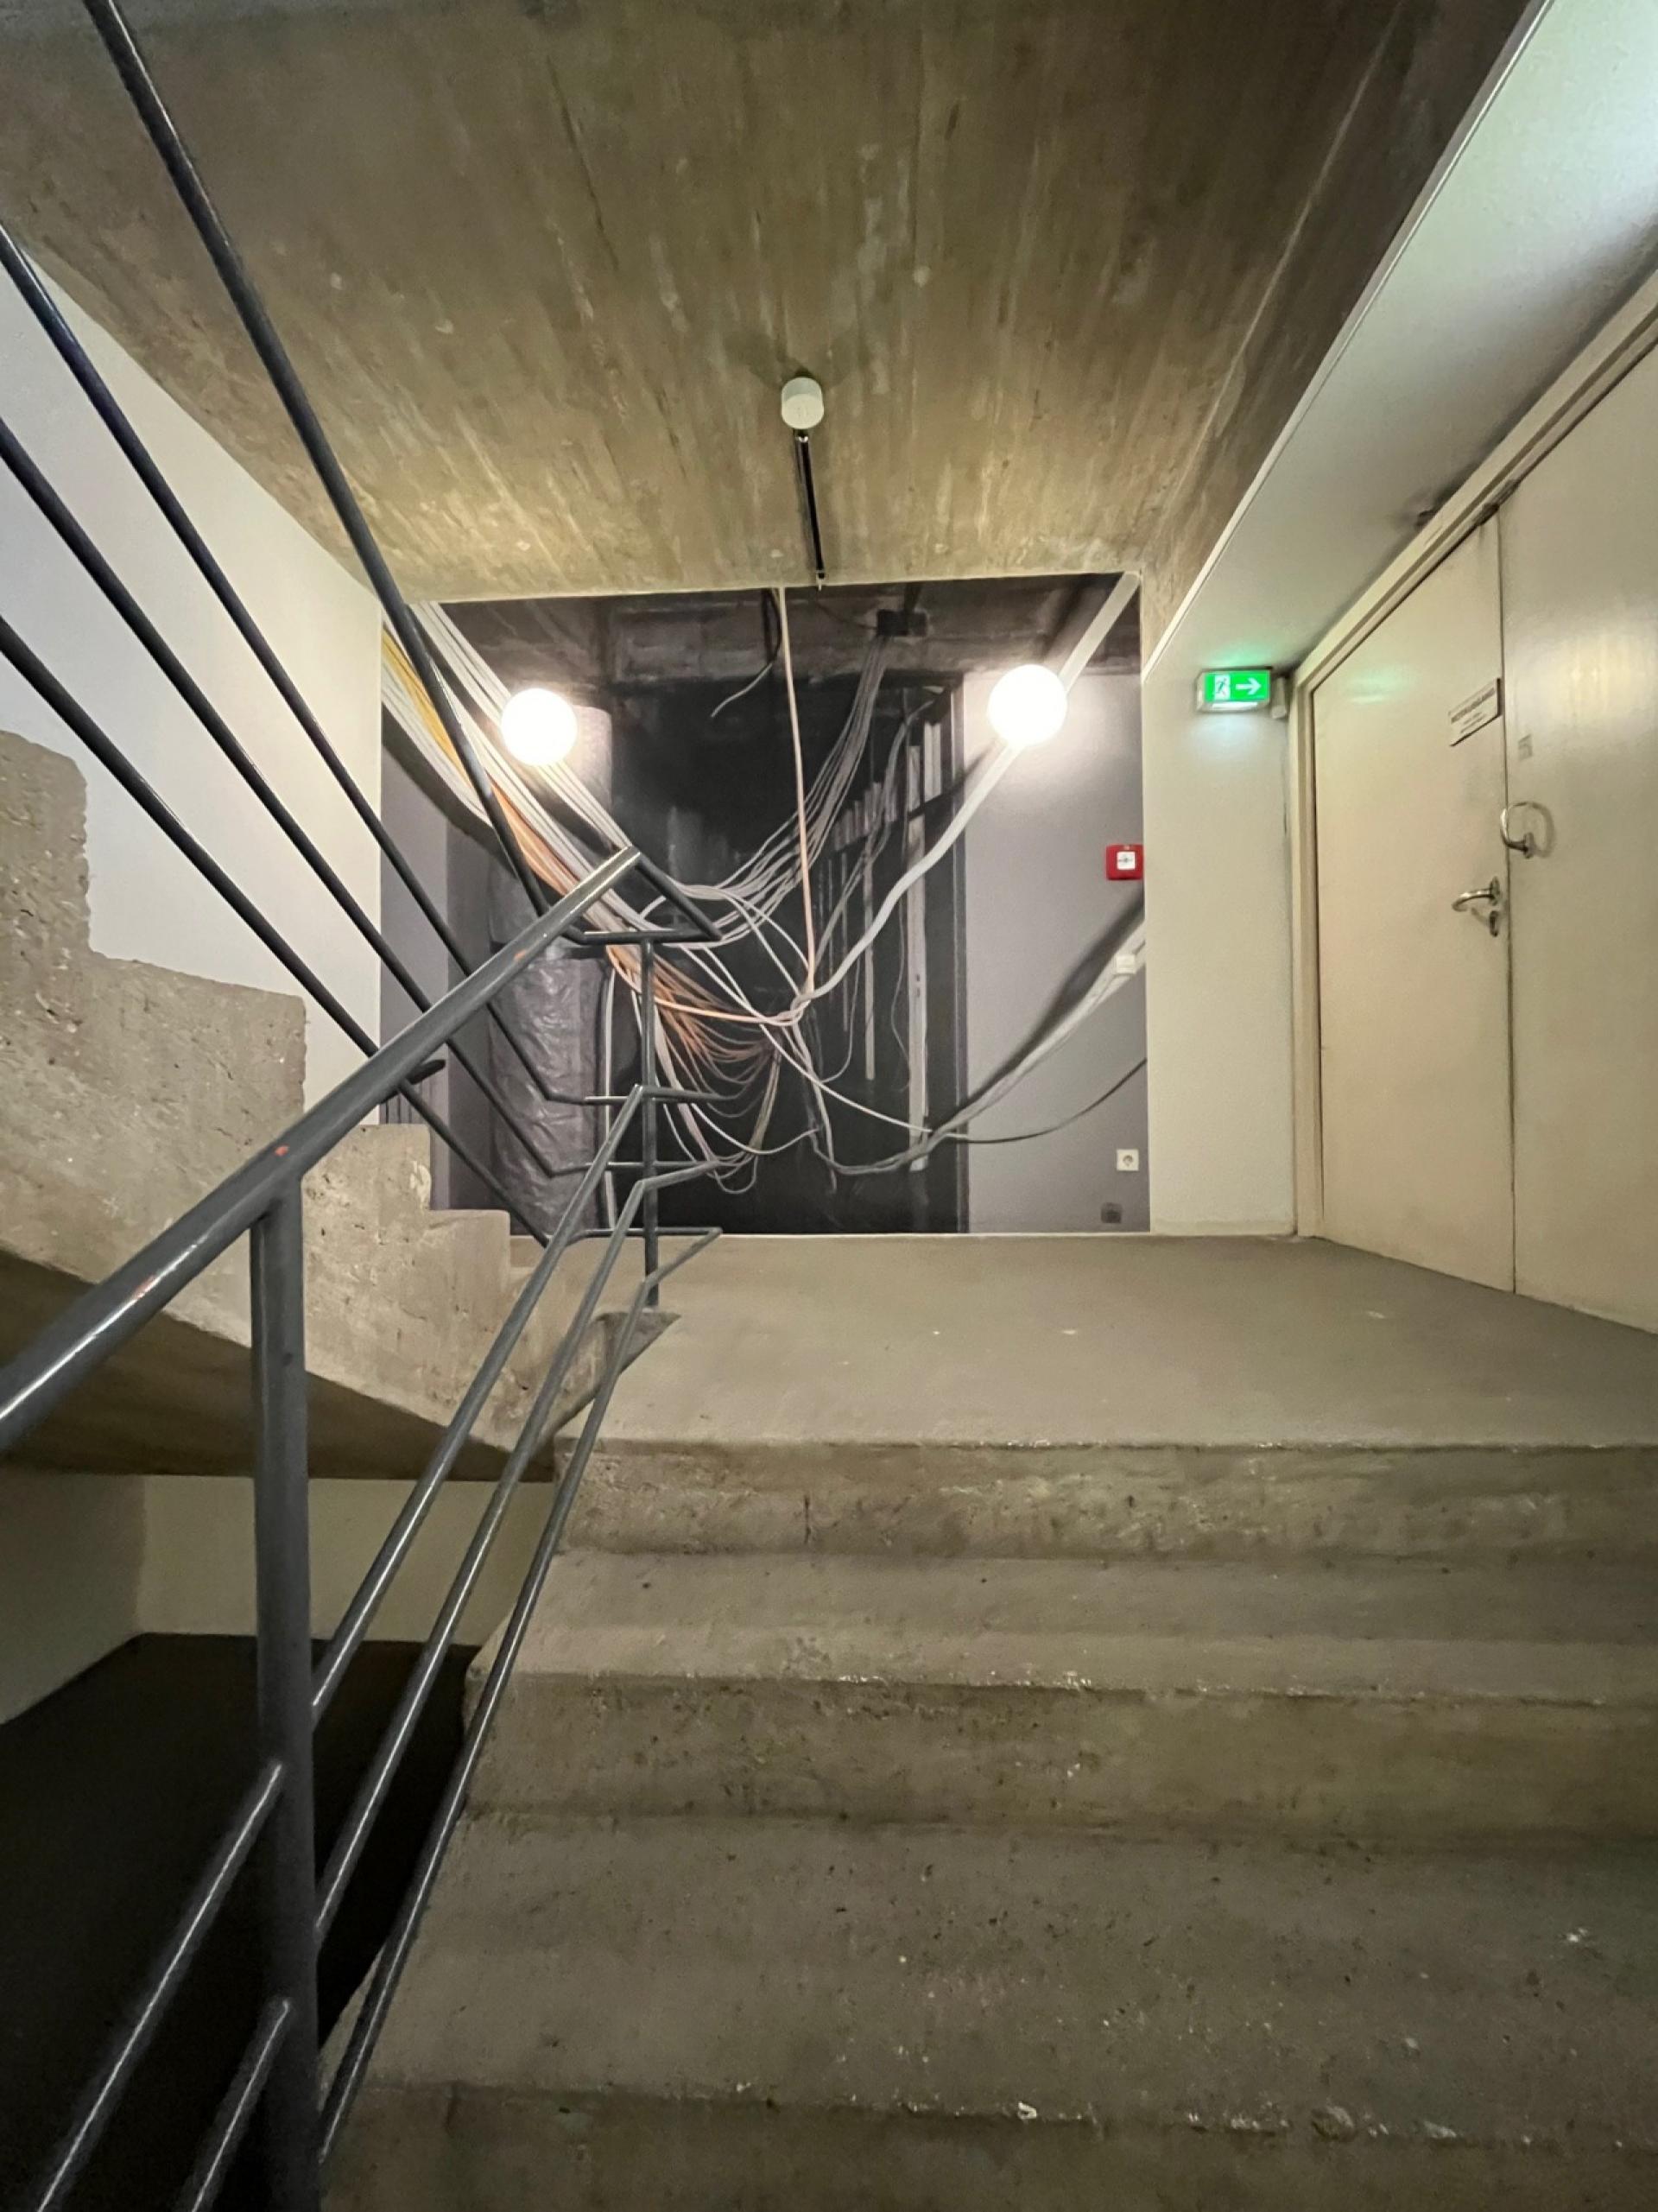 The main staircase leading to the exhibition halls, pictured here before the completion of renovations overseen by Brenne Architekten. Photo: Holger Herschel / © Holger Herschel